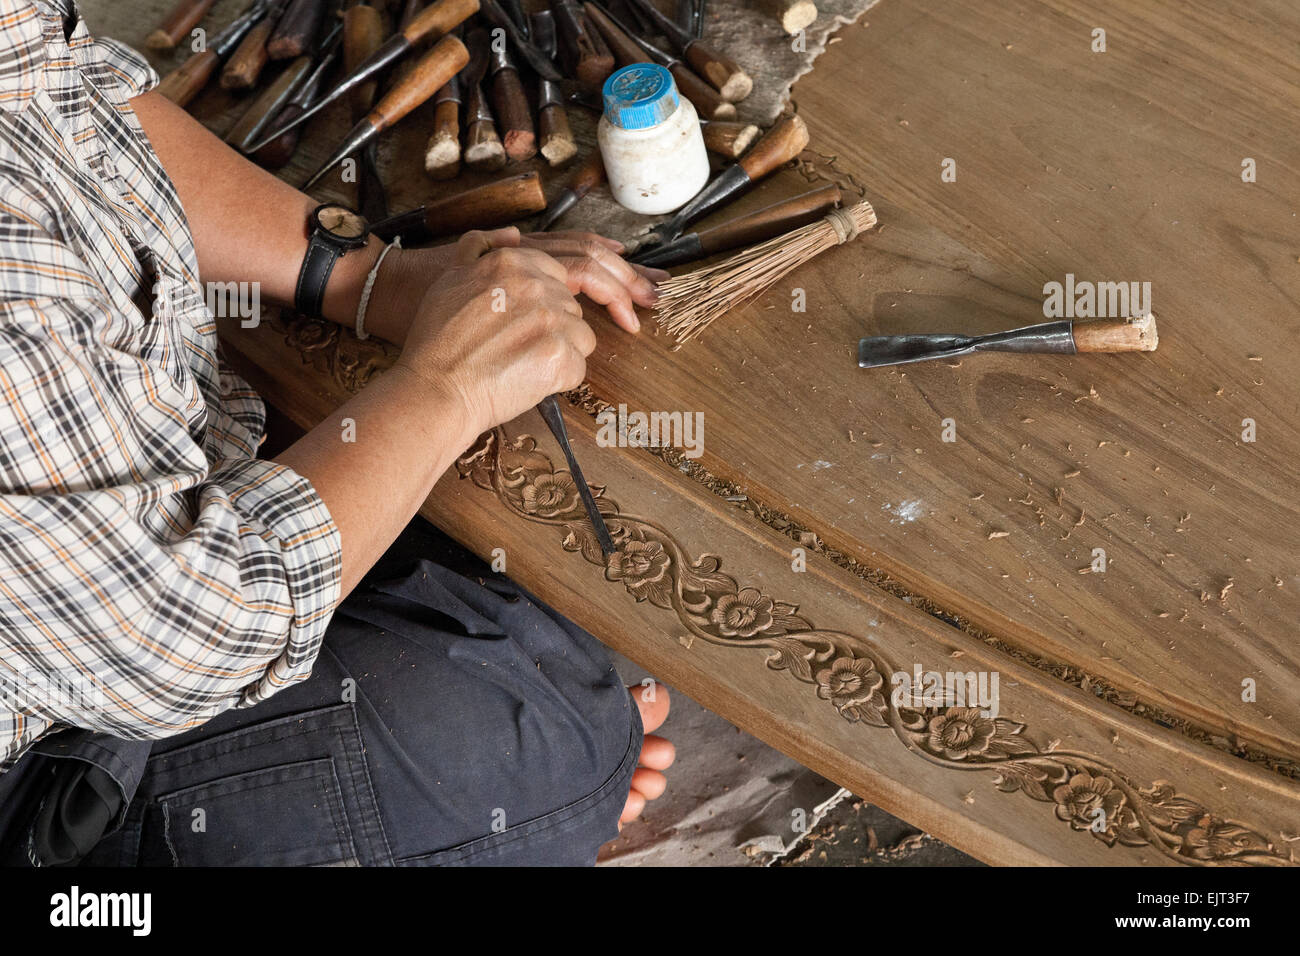 Chiang Mai, Northern Thailand, hardwood carving artistic carver at work Stock Photo